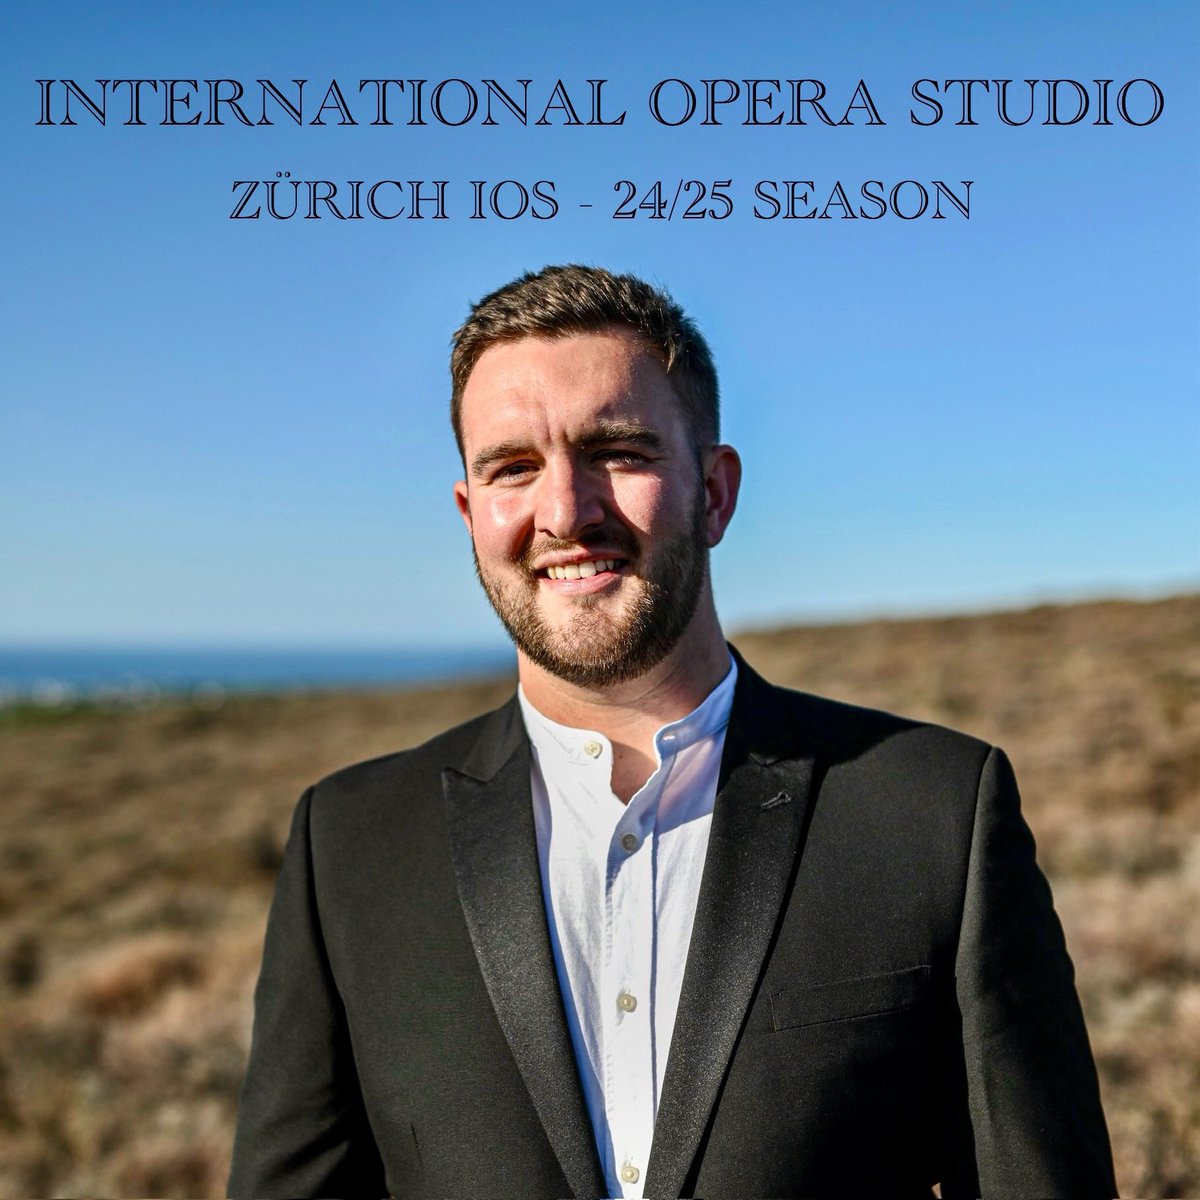 INTERNATIONAL OPERA STUDIO 🇨🇭 I’m proud to announce that I will be joining the International Opera Studio at the Zürich Opera house as a young artist for the 24/25 season. Incredibly excited to work with some of the best singers in the world. Let’s get back to work 🫶🏻🎶🏴󠁧󠁢󠁷󠁬󠁳󠁿